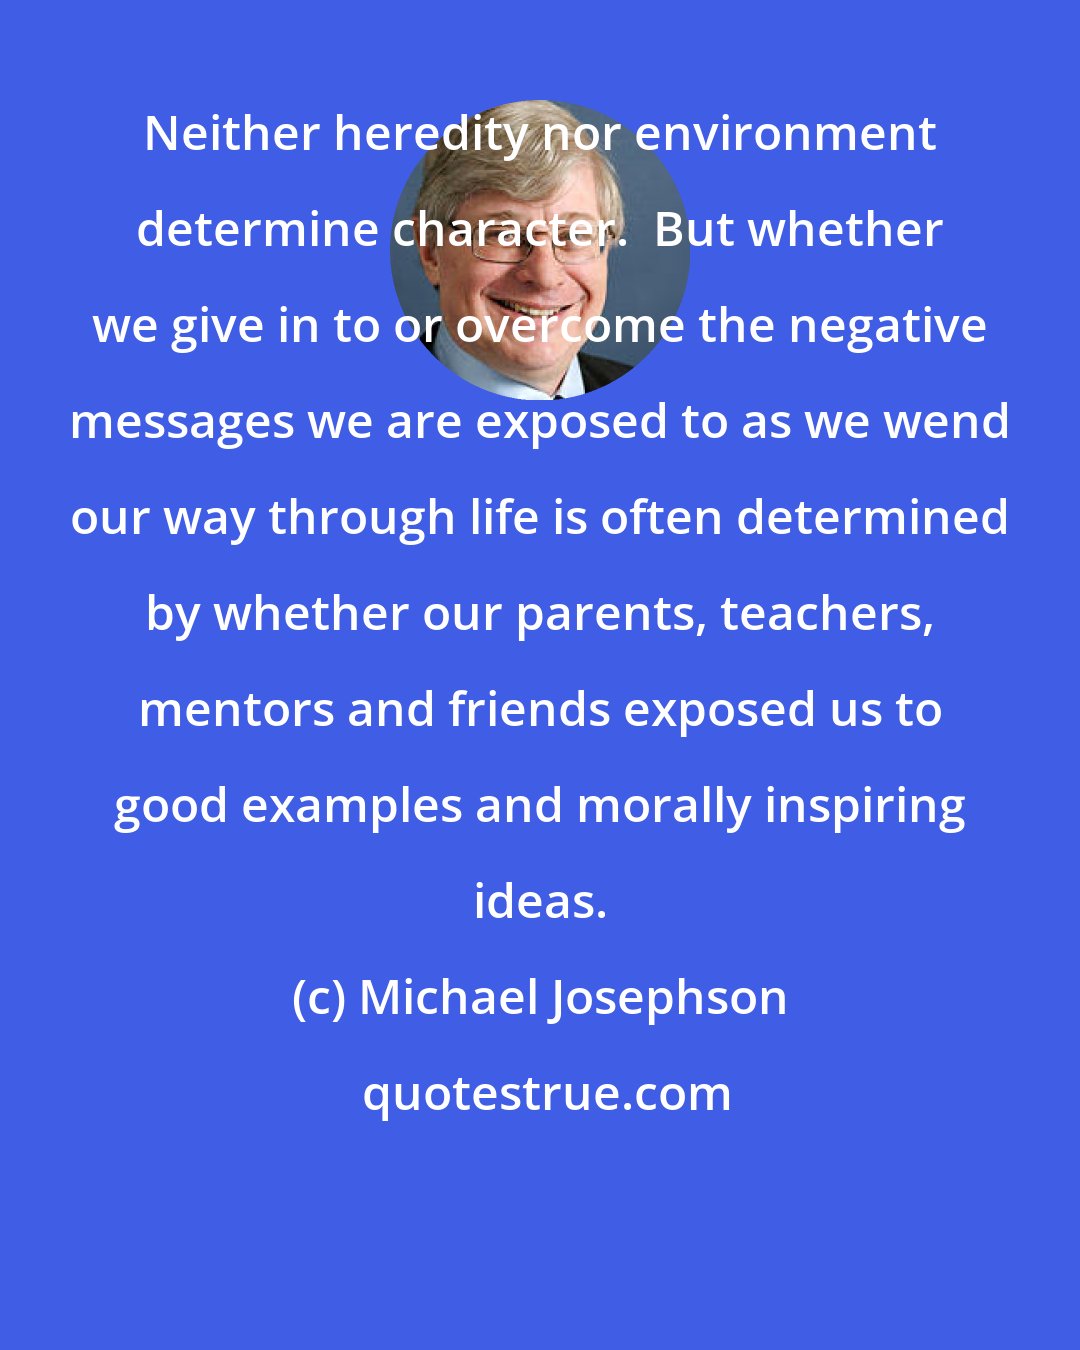 Michael Josephson: Neither heredity nor environment determine character.  But whether we give in to or overcome the negative messages we are exposed to as we wend our way through life is often determined by whether our parents, teachers, mentors and friends exposed us to good examples and morally inspiring ideas.